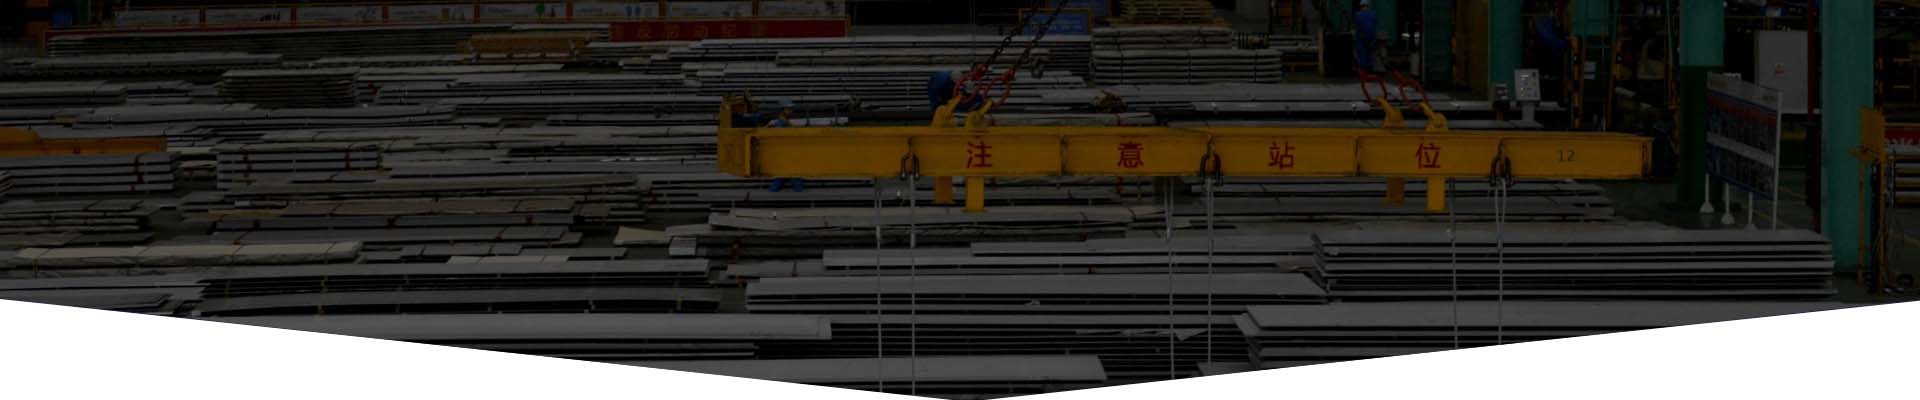 Ronsco, Stainless Steel Plate Stockist, Stainless Steel Coil Supplier, Stainless Steel Profile Manufacturer